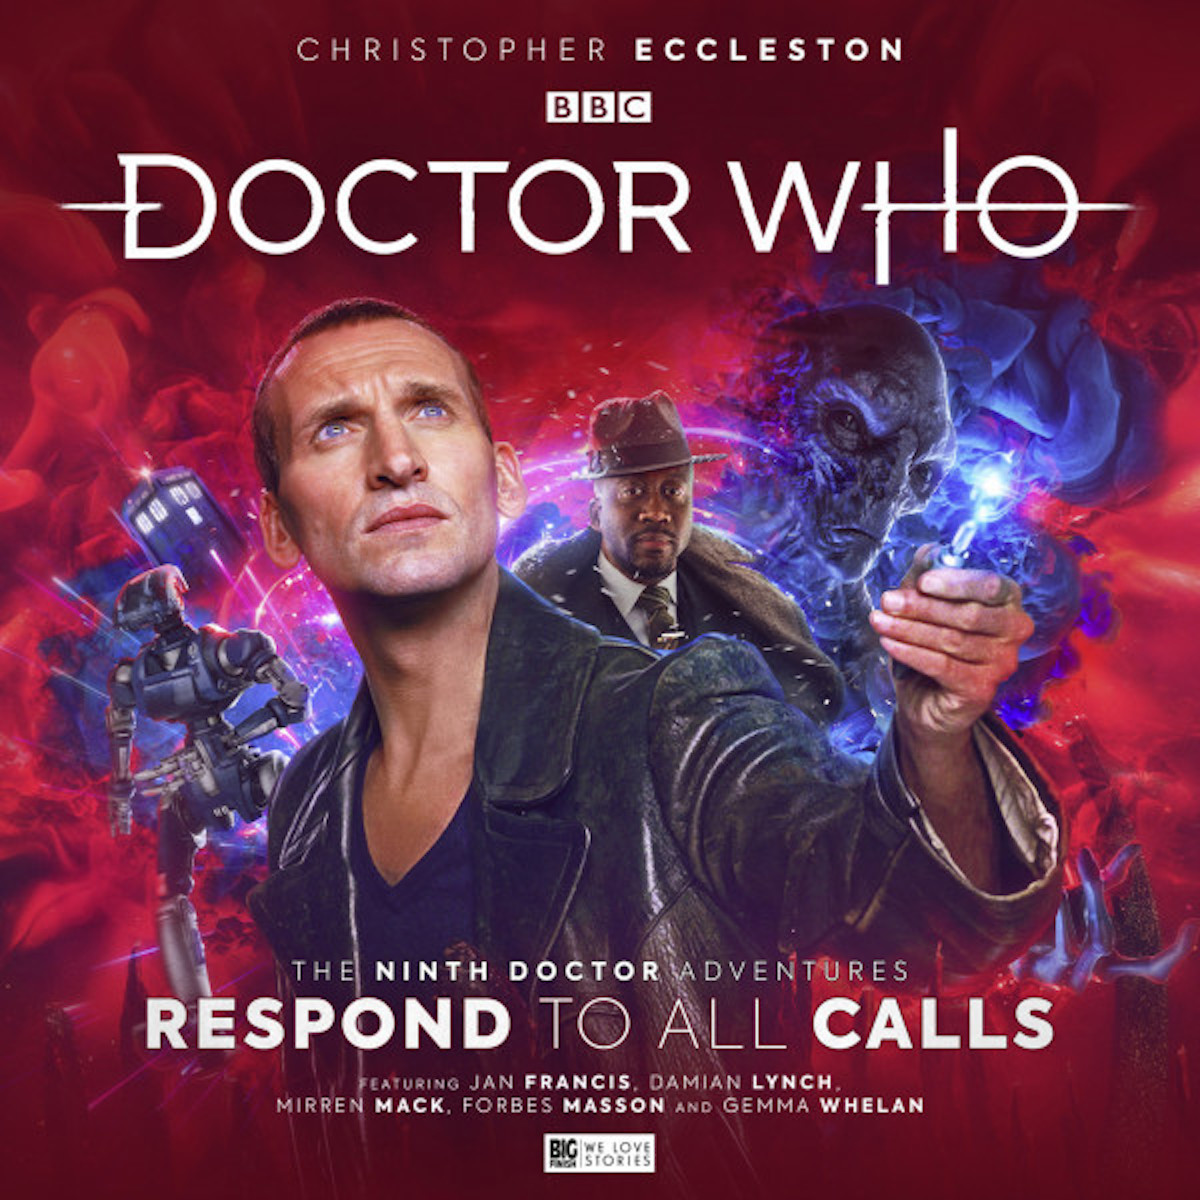 The Ninth Doctor Adventures Volume 2 Respond to Calls Limited Edition Vinyl